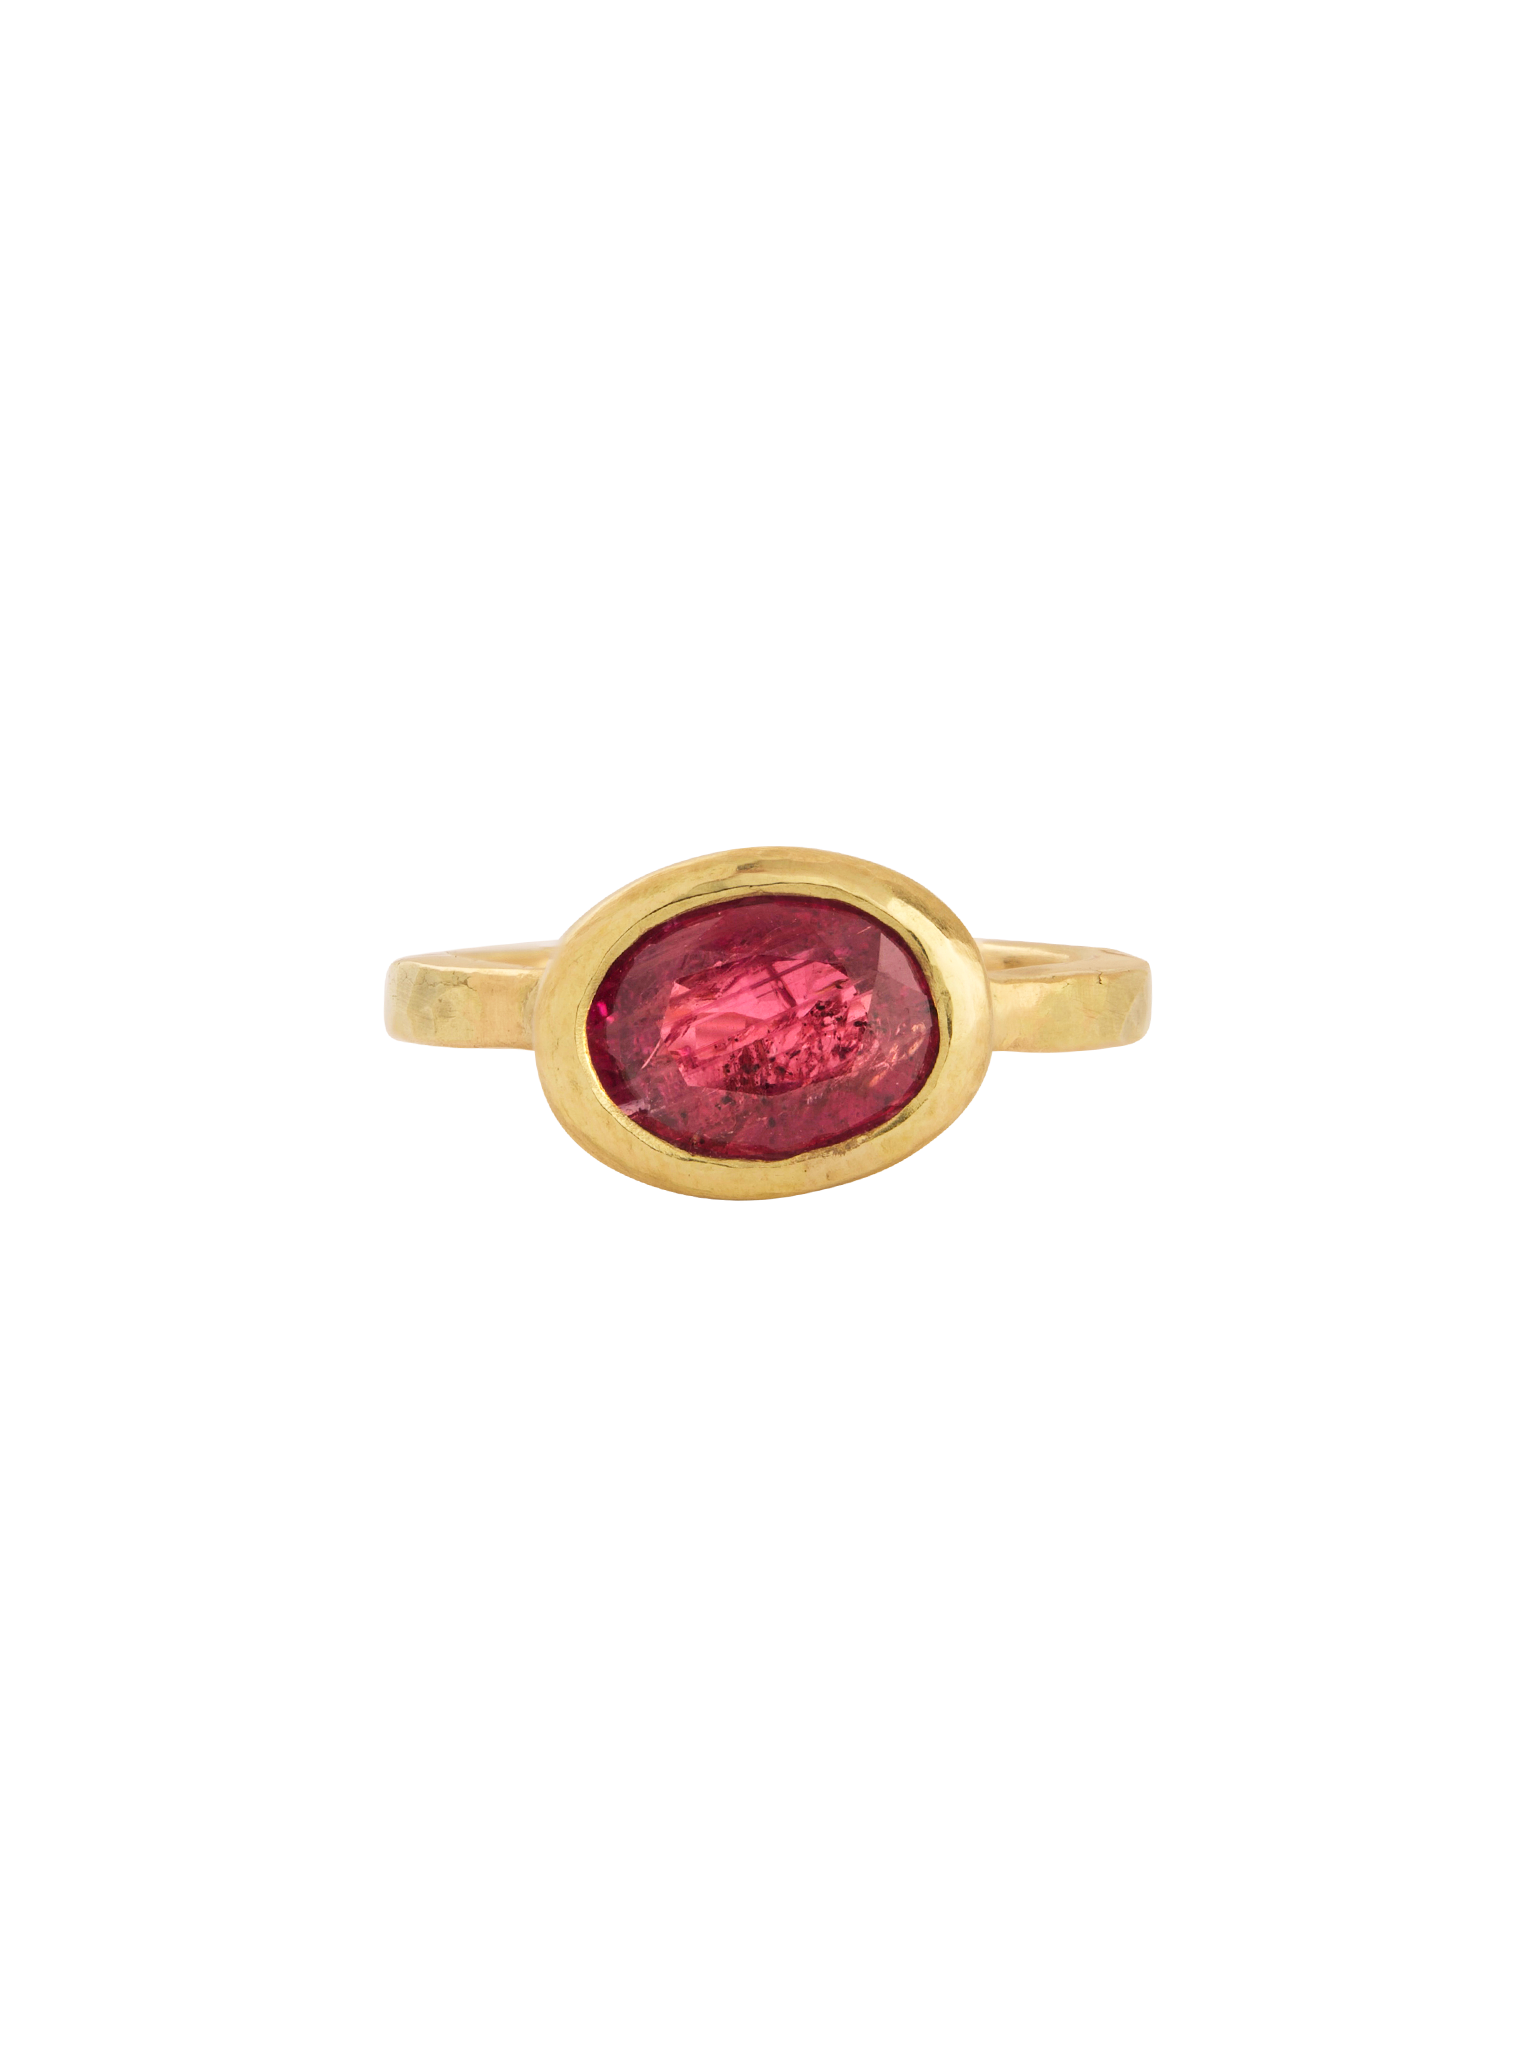 18kt yellow gold 2.82ct oval pink sapphire ring